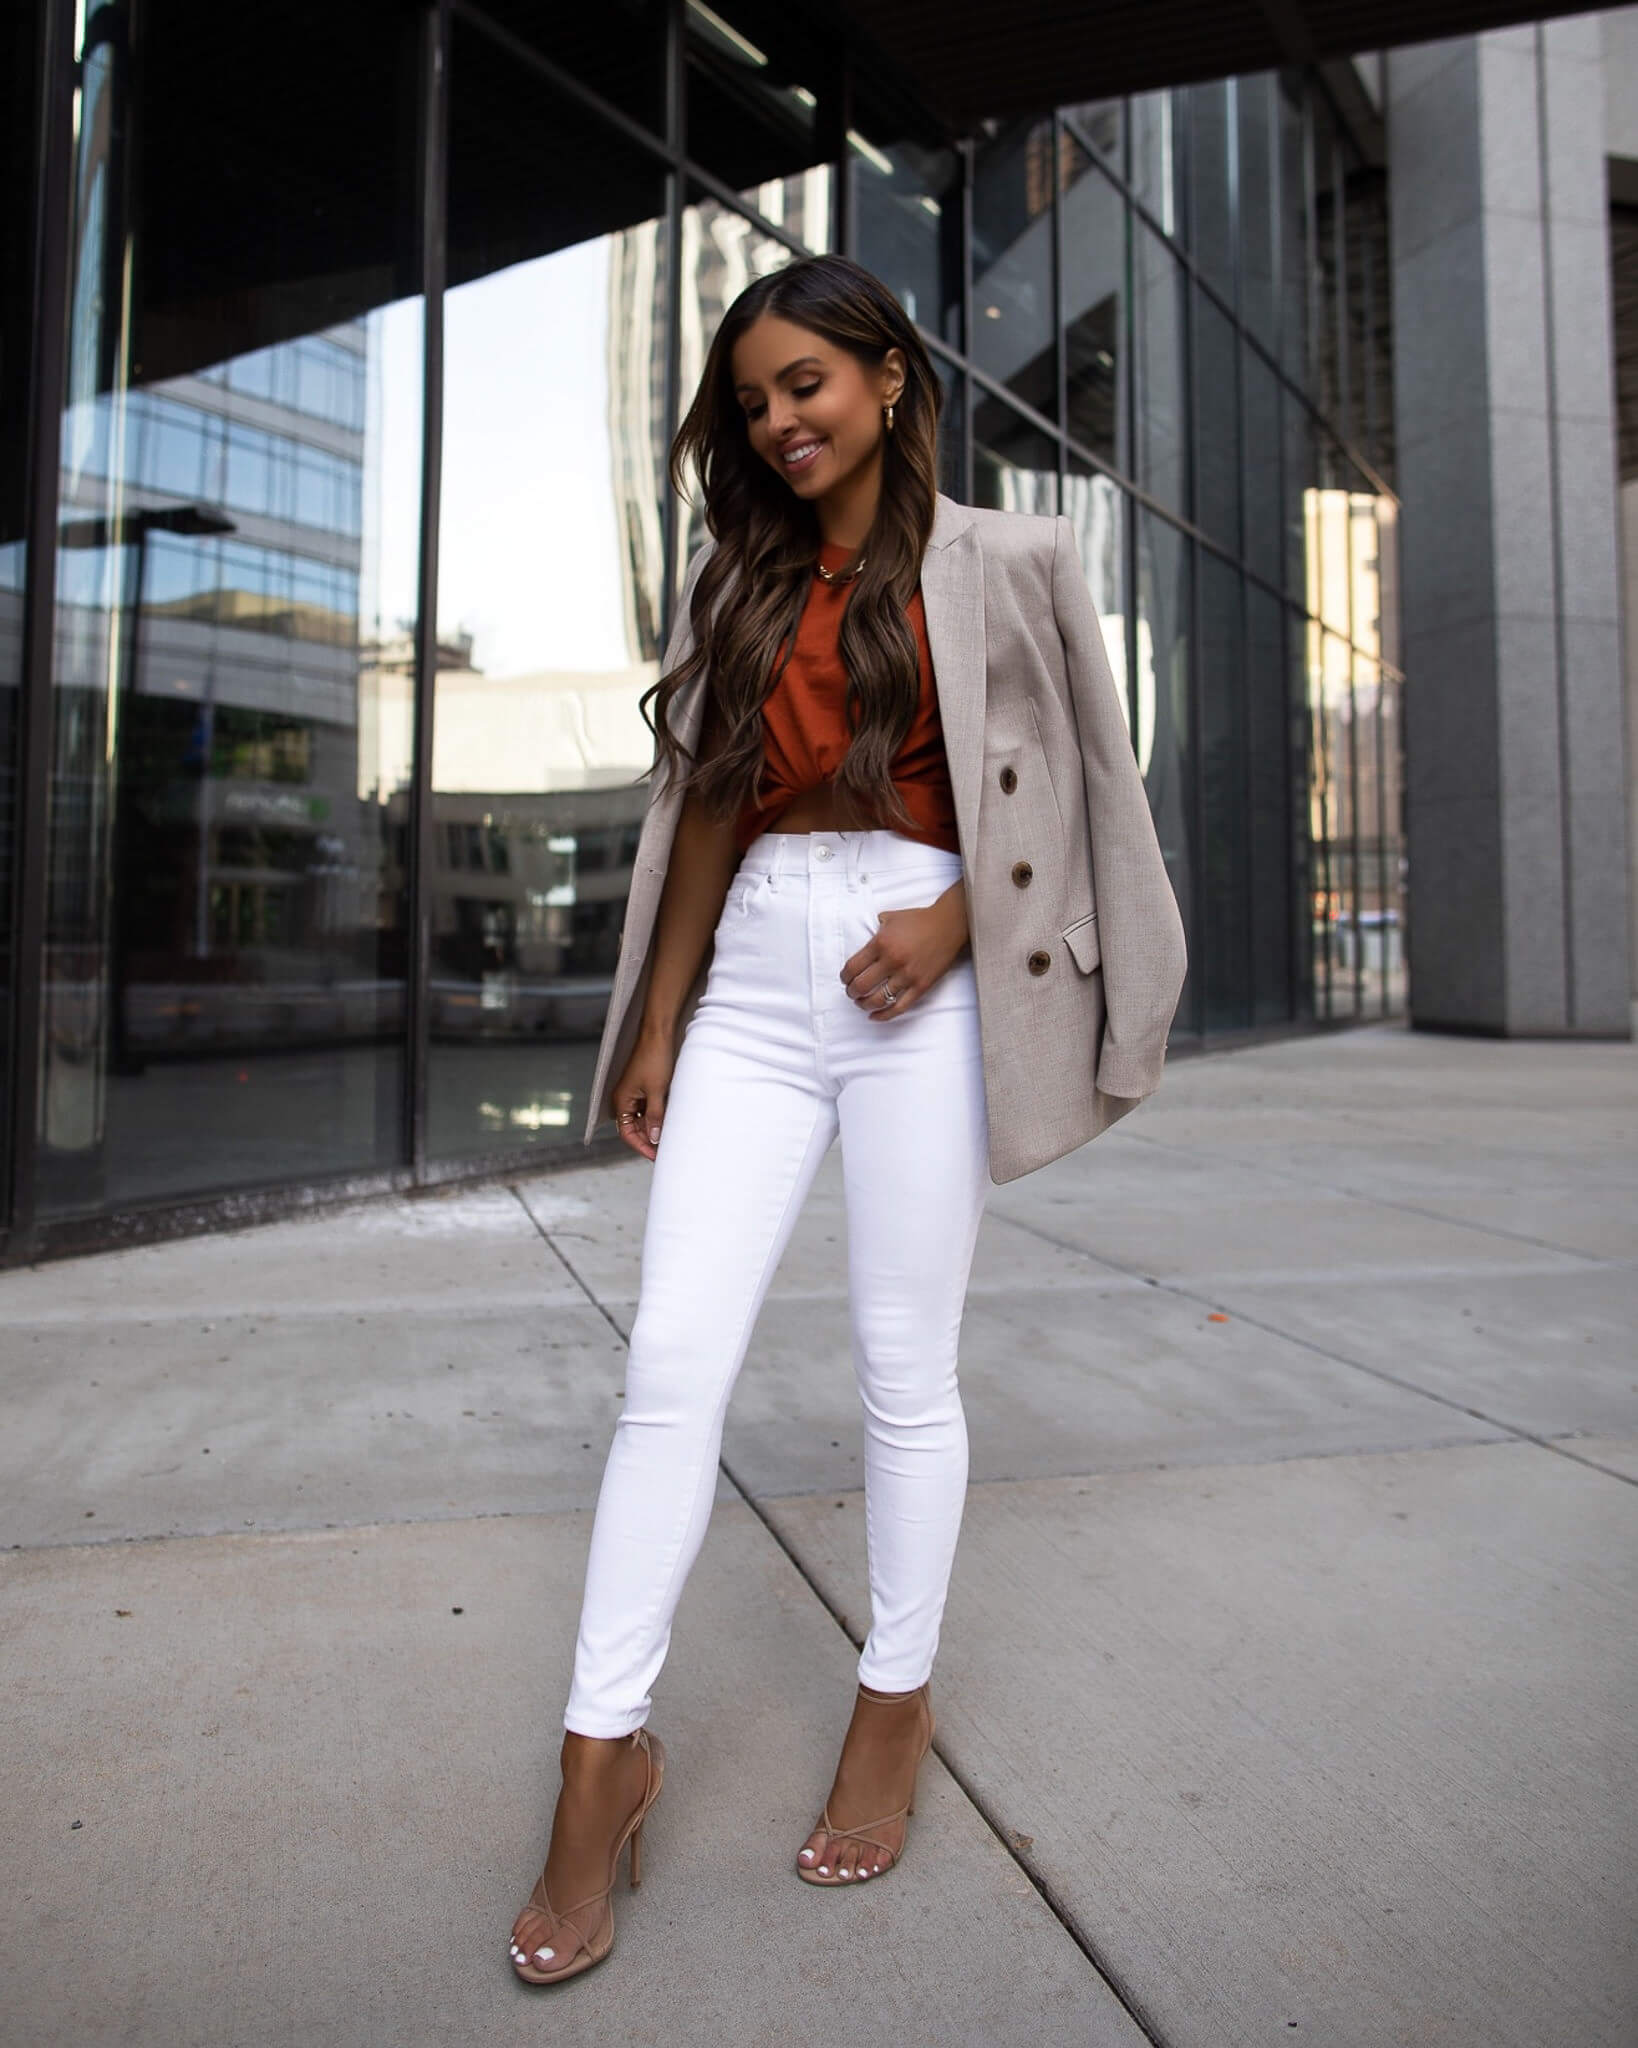 Brown Pumps with White Jeans Outfits (4 ideas & outfits)